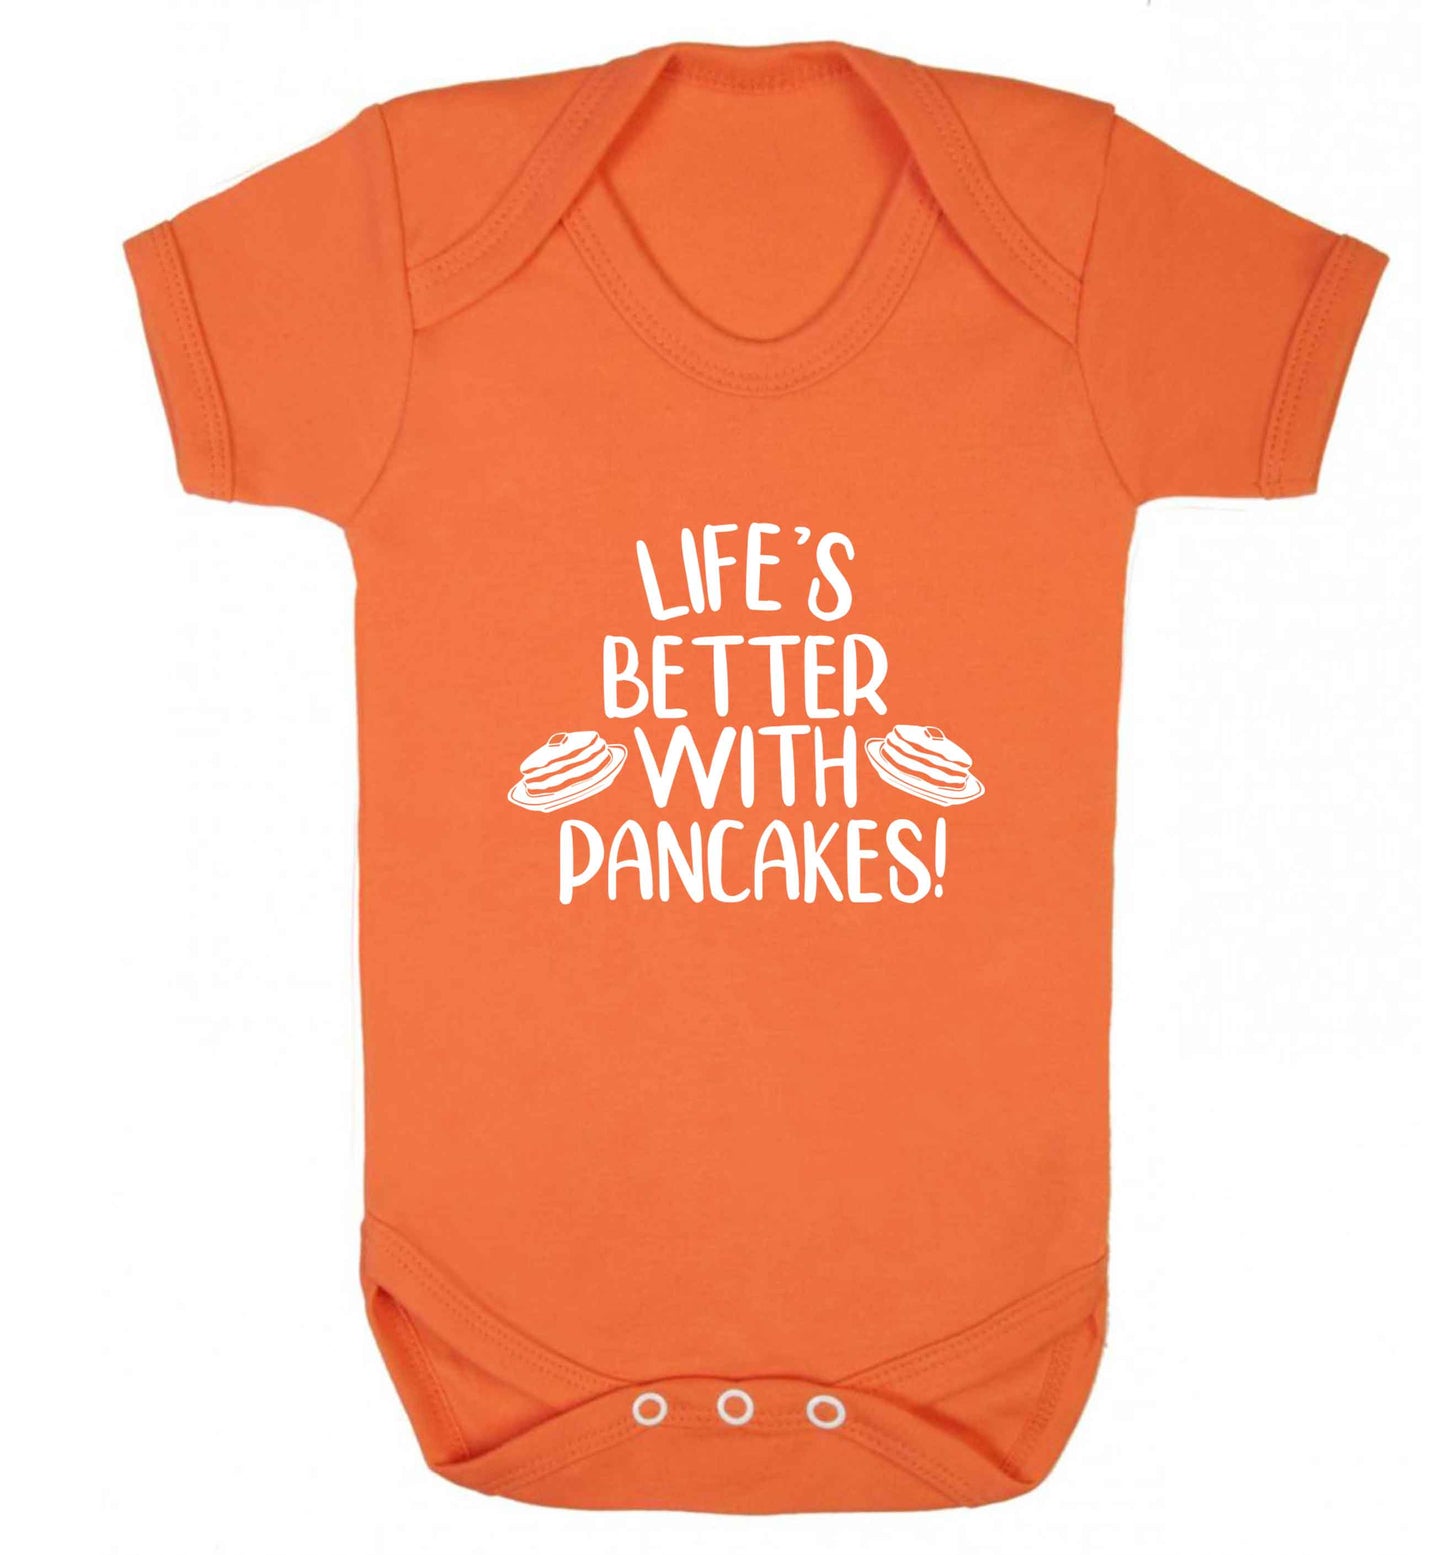 Life's better with pancakes baby vest orange 18-24 months